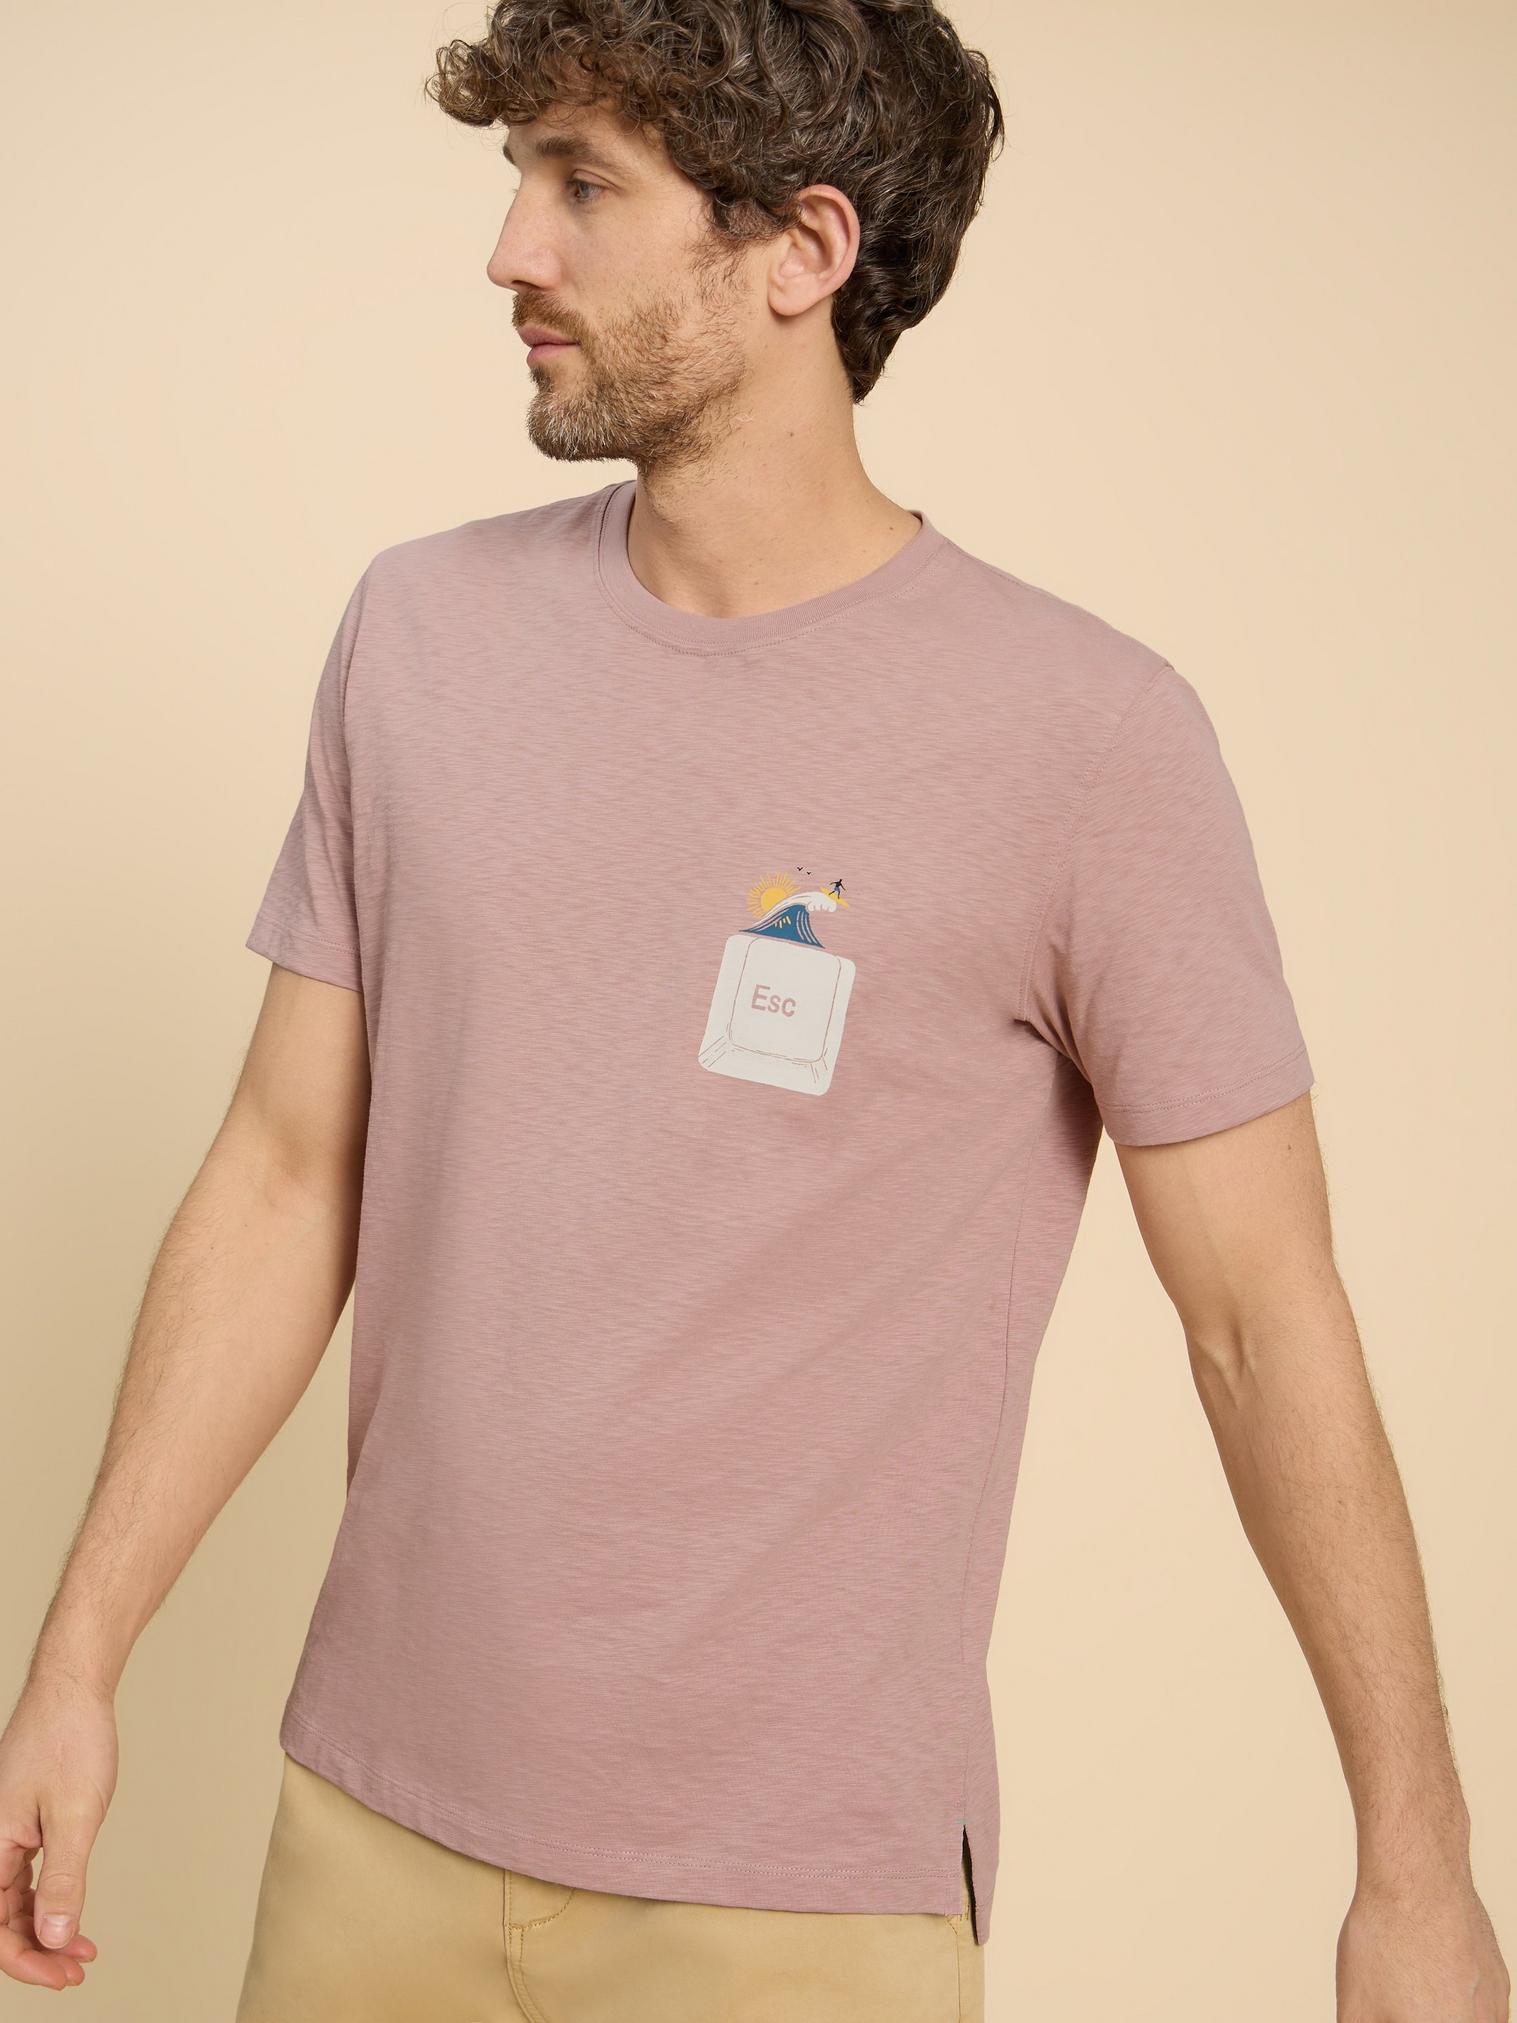 Escape Graphic Short Sleeve Tee in PINK PR - LIFESTYLE